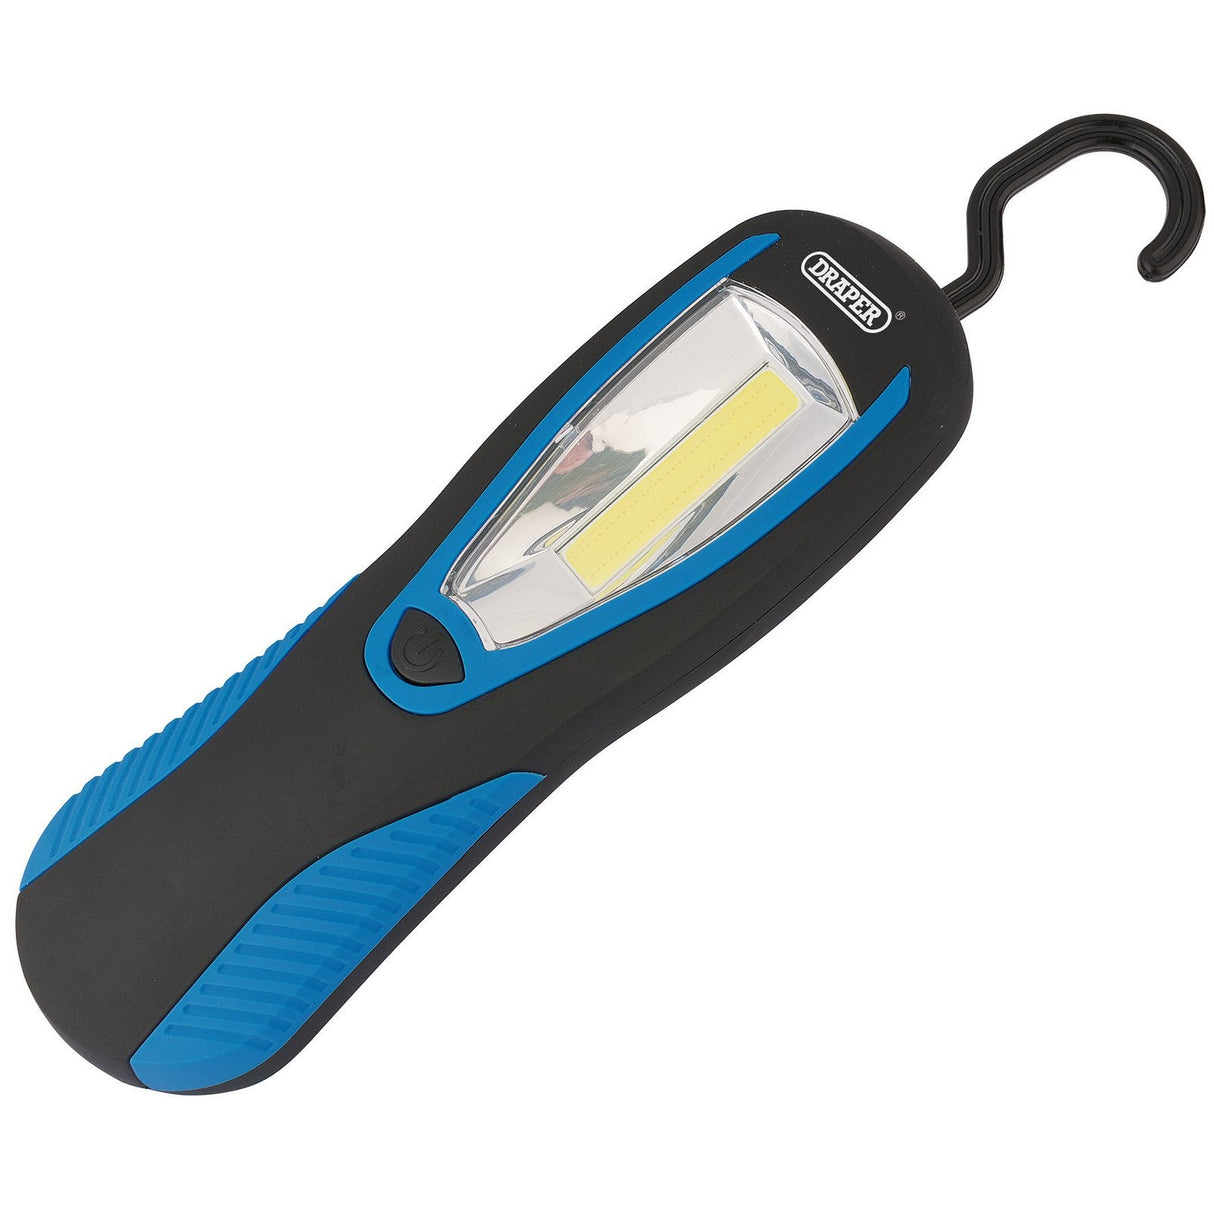 Draper Cob Led Work Light With Magnetic Back And Hanging Hook, 3W, 200 Lumens, Blue, 3 X Aa Batteries Supplied - WLCOB - Farming Parts